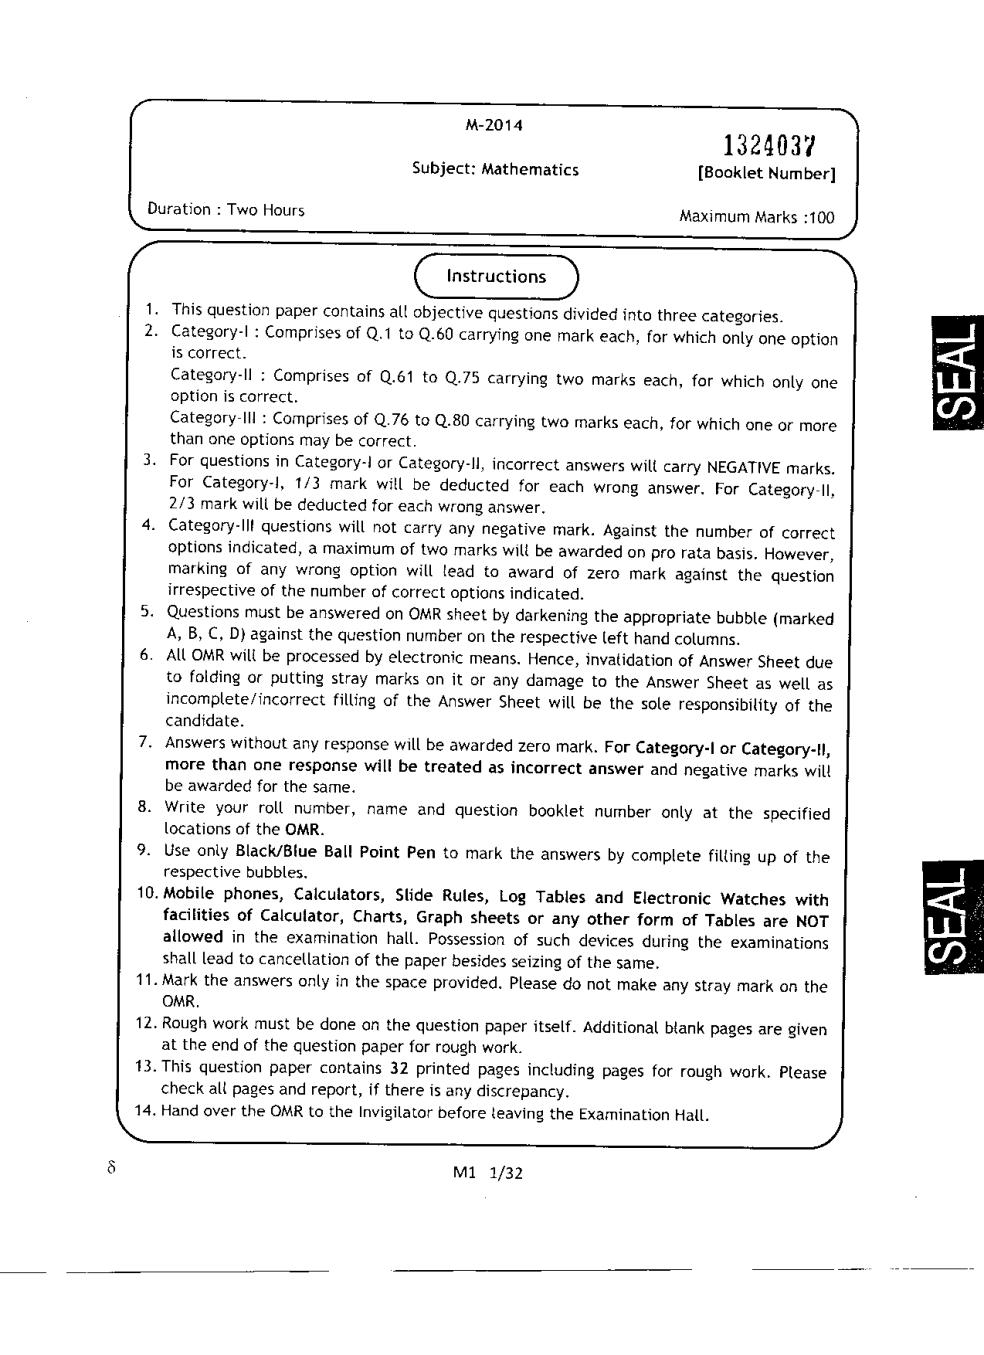 WBJEE Question Papers 2014 - Mathematics - Page 1